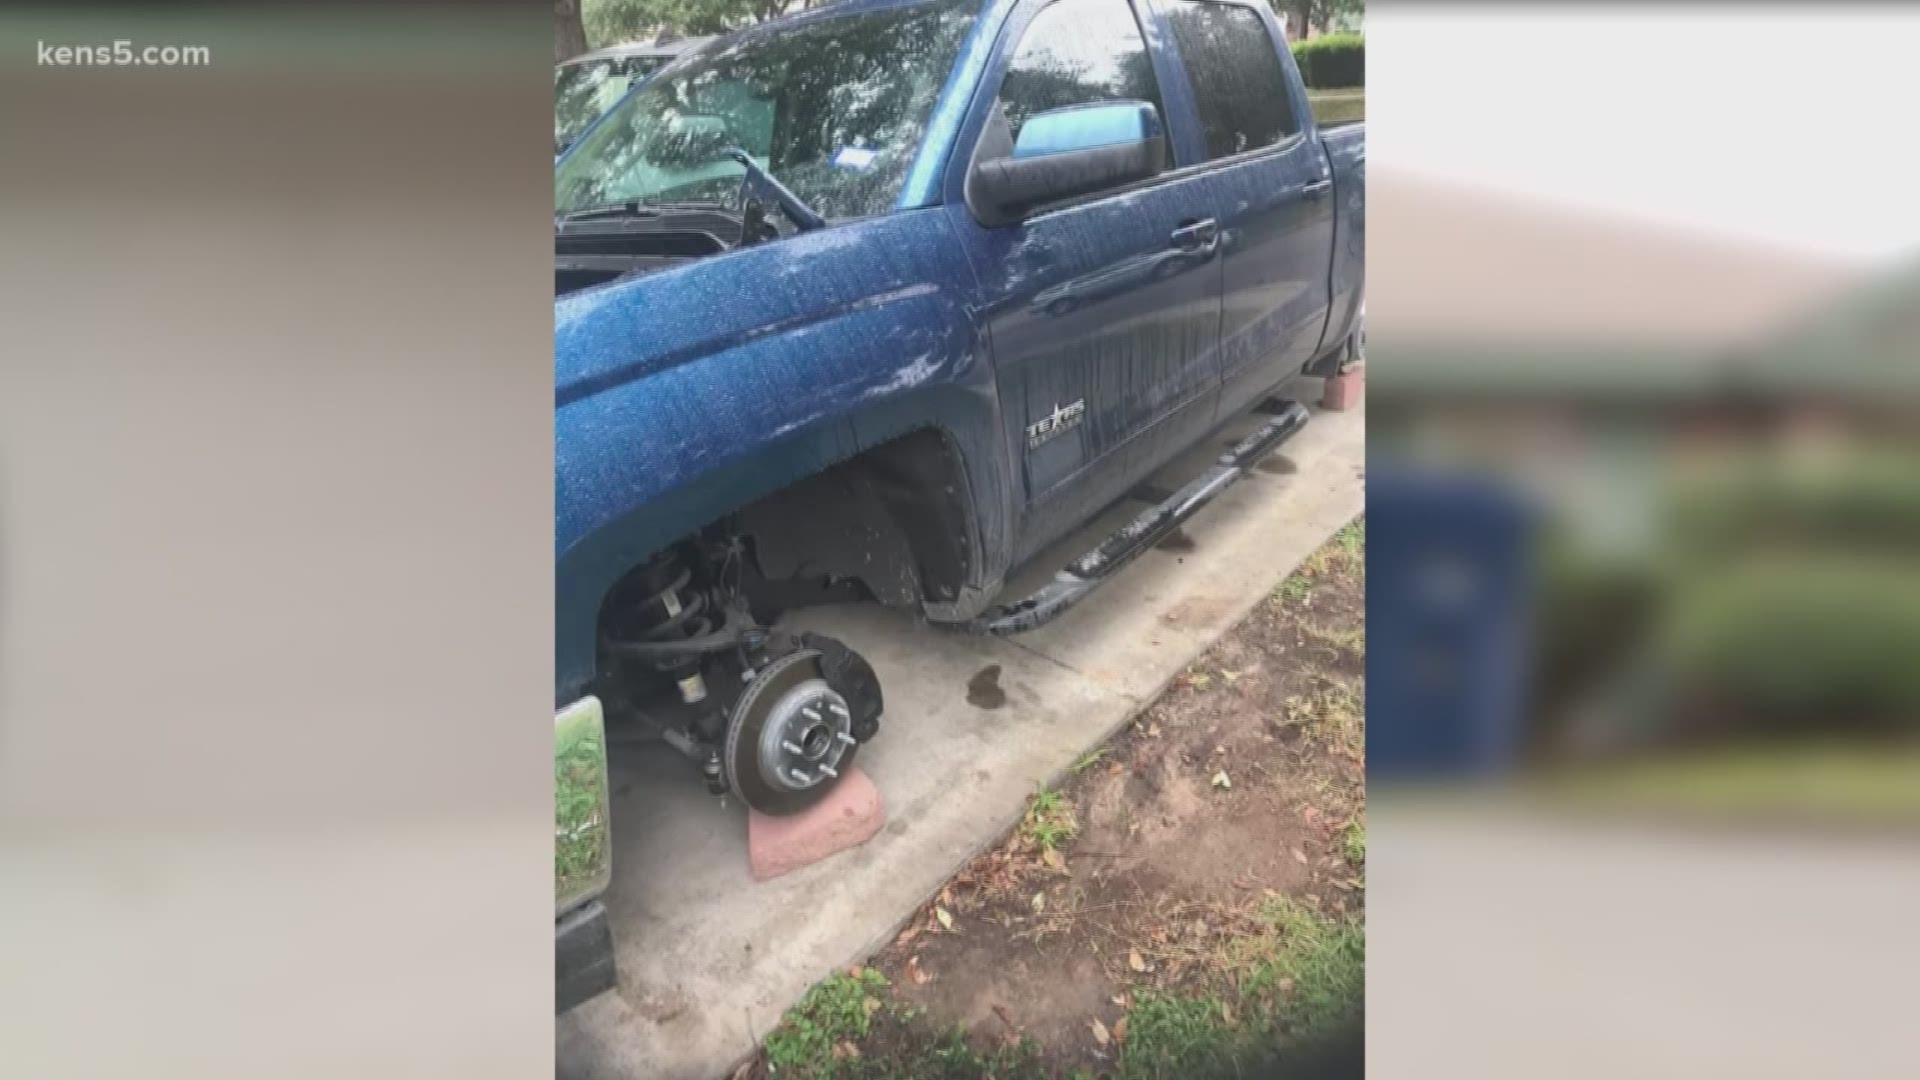 The car's owner says she's concerned that once she gets her truck repaired, the crooks might just strike again.